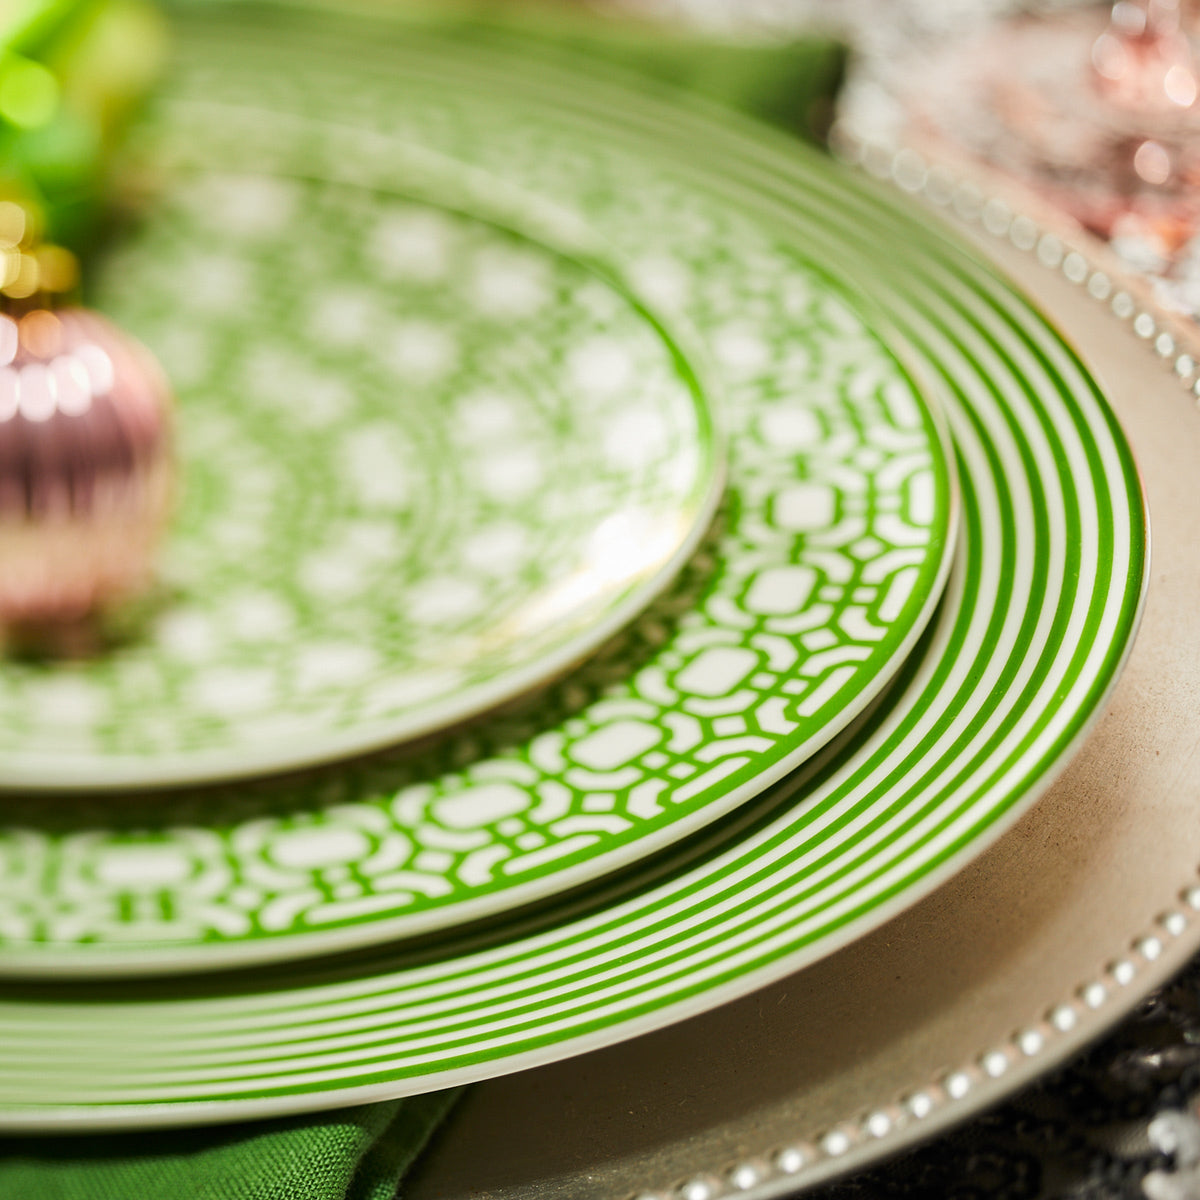 Close-up of patterned green and white Newport Garden Gate Verde Rimmed Salad Plates by Caskata Artisanal Home stacked on a silver charger plate, with a green cloth napkin partially visible underneath.